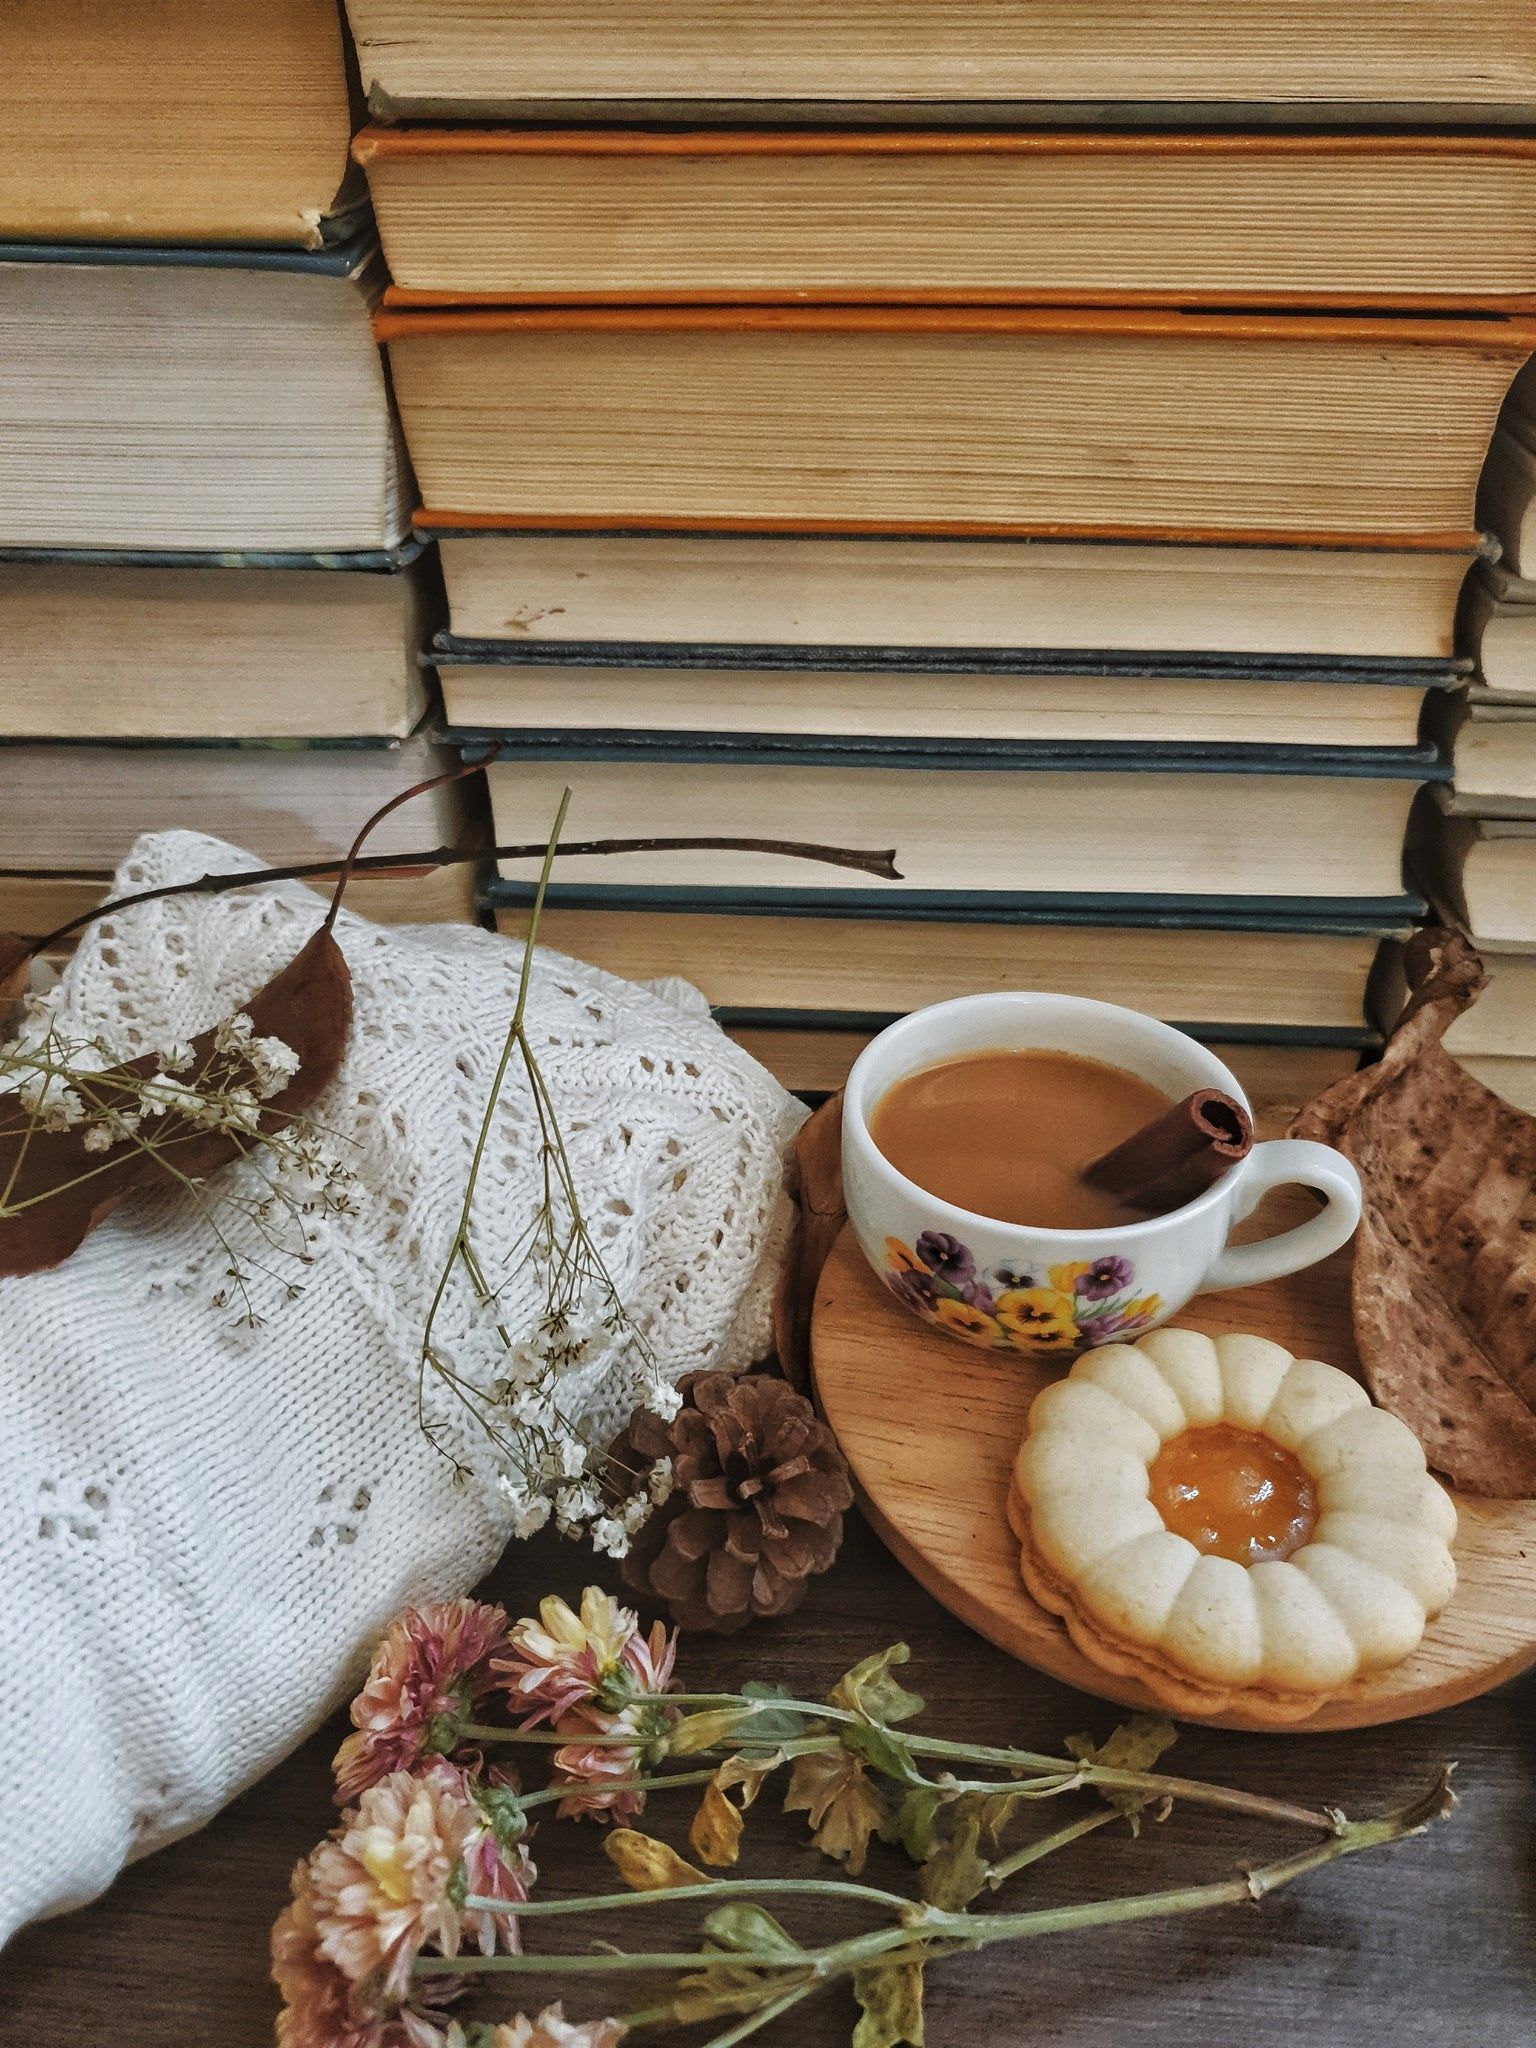 A table with books and tea on it - Cozy, vintage fall